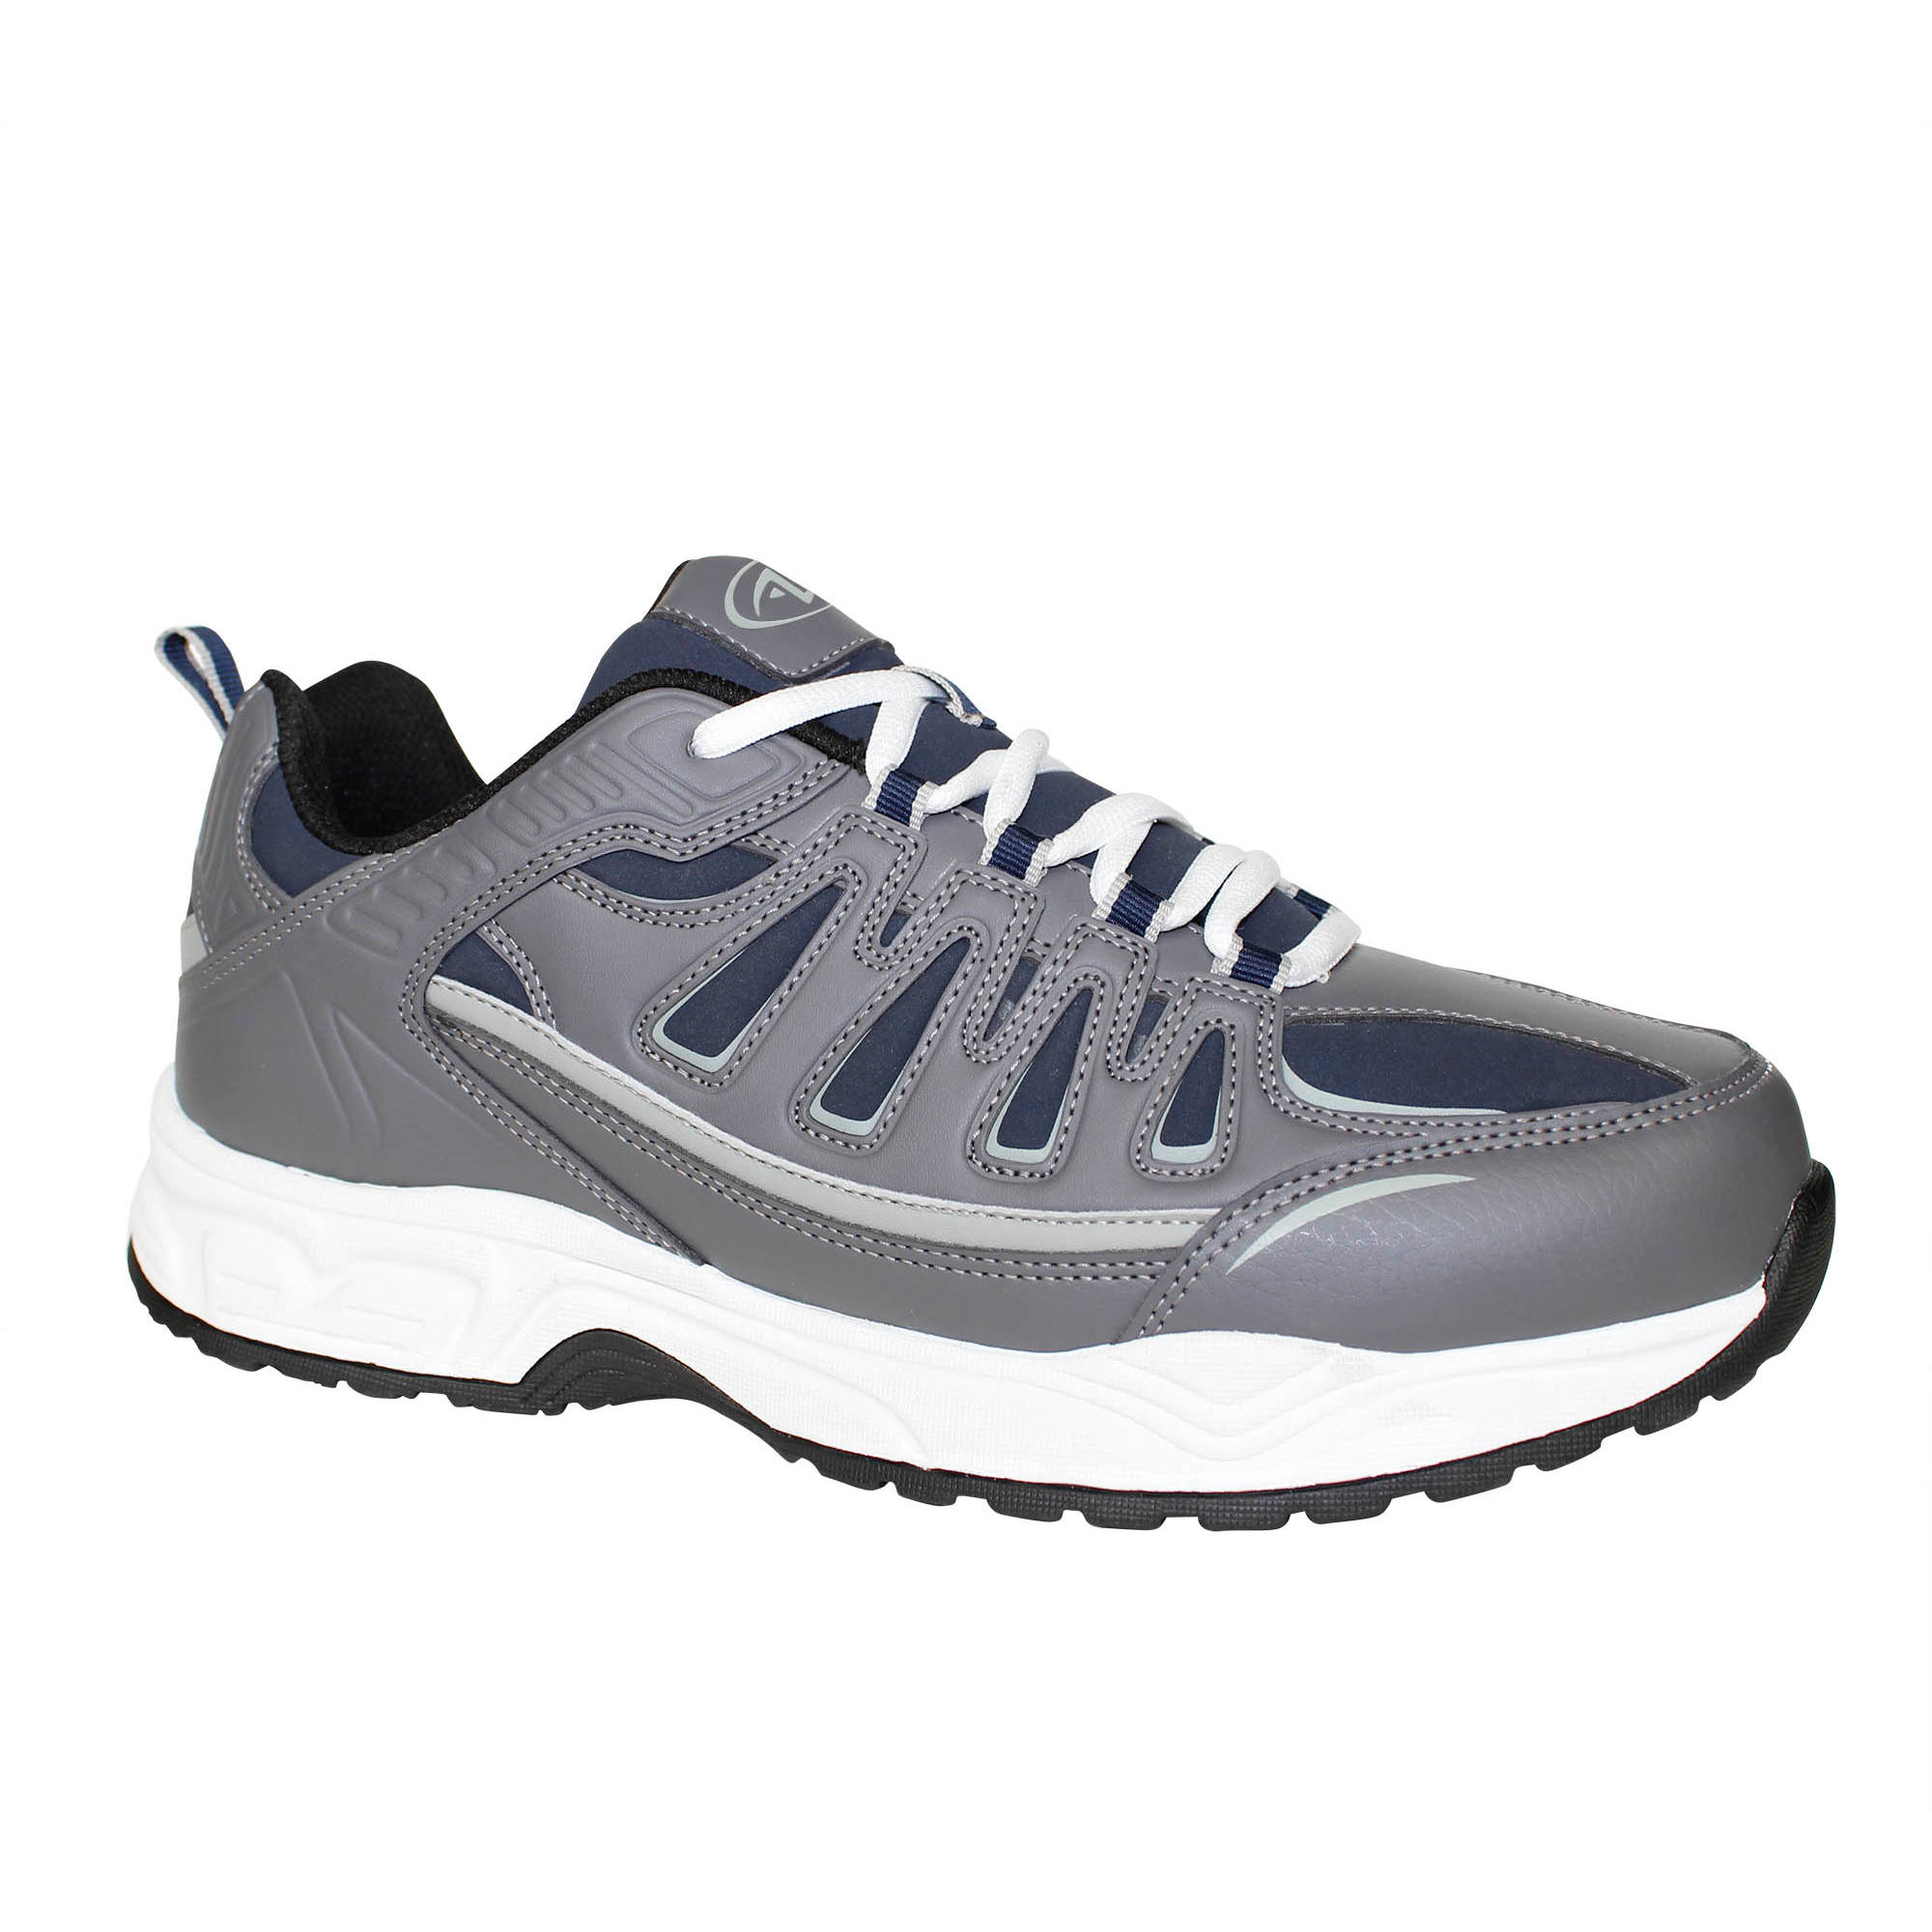 Athletic Works men’s athletic shoes for $10